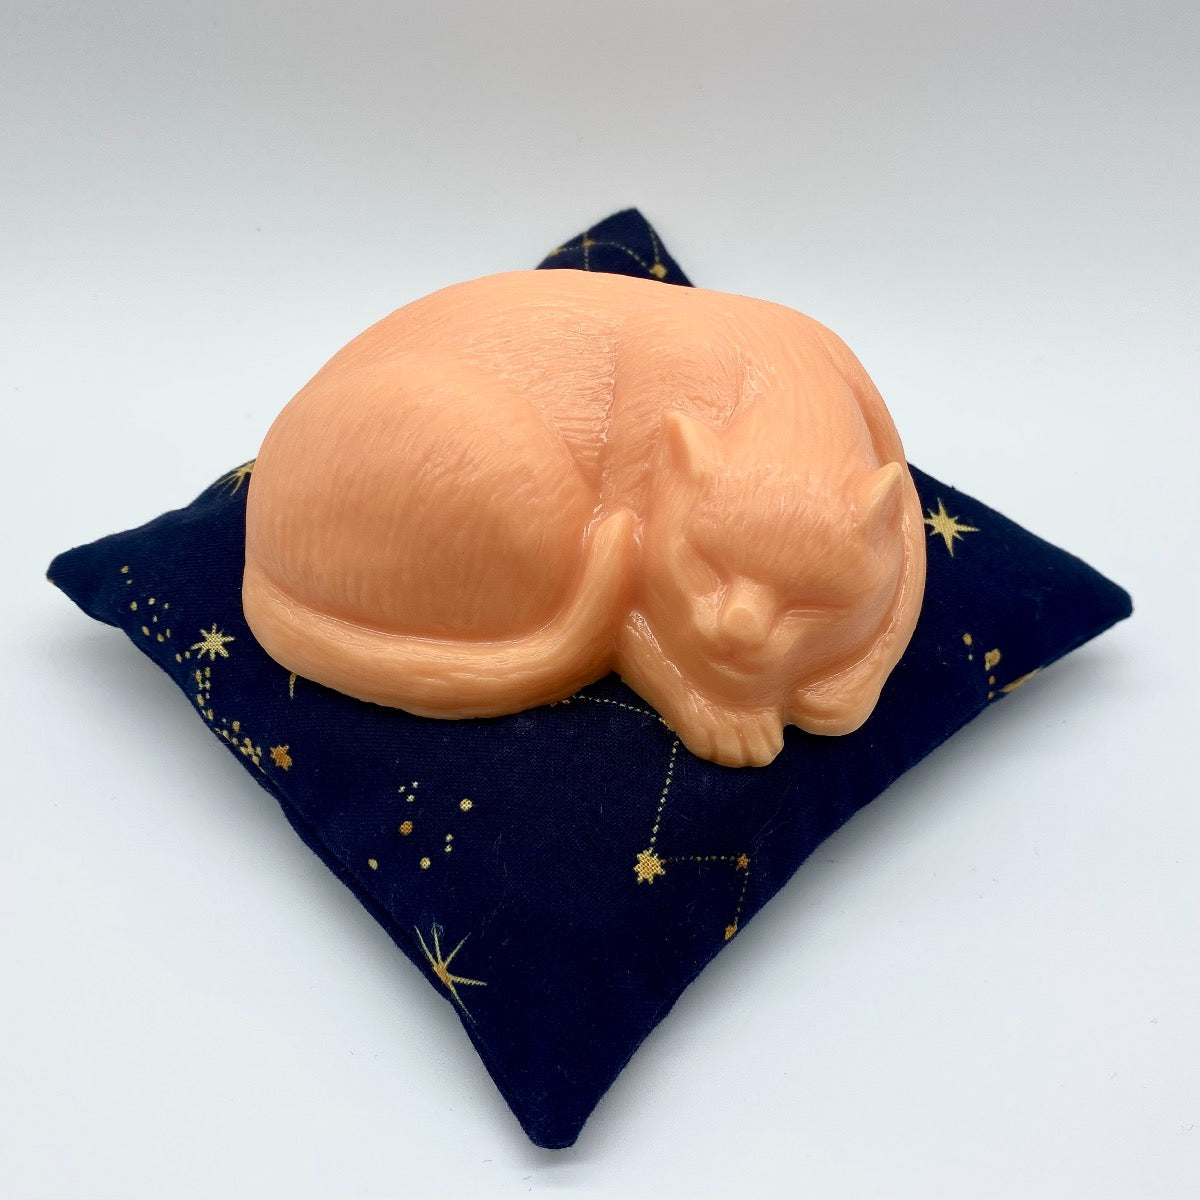 Mindfully sleeping orange cat-shaped soap, representing the essence of mindful beauty, resting on a celestial navy blue pillow with stars